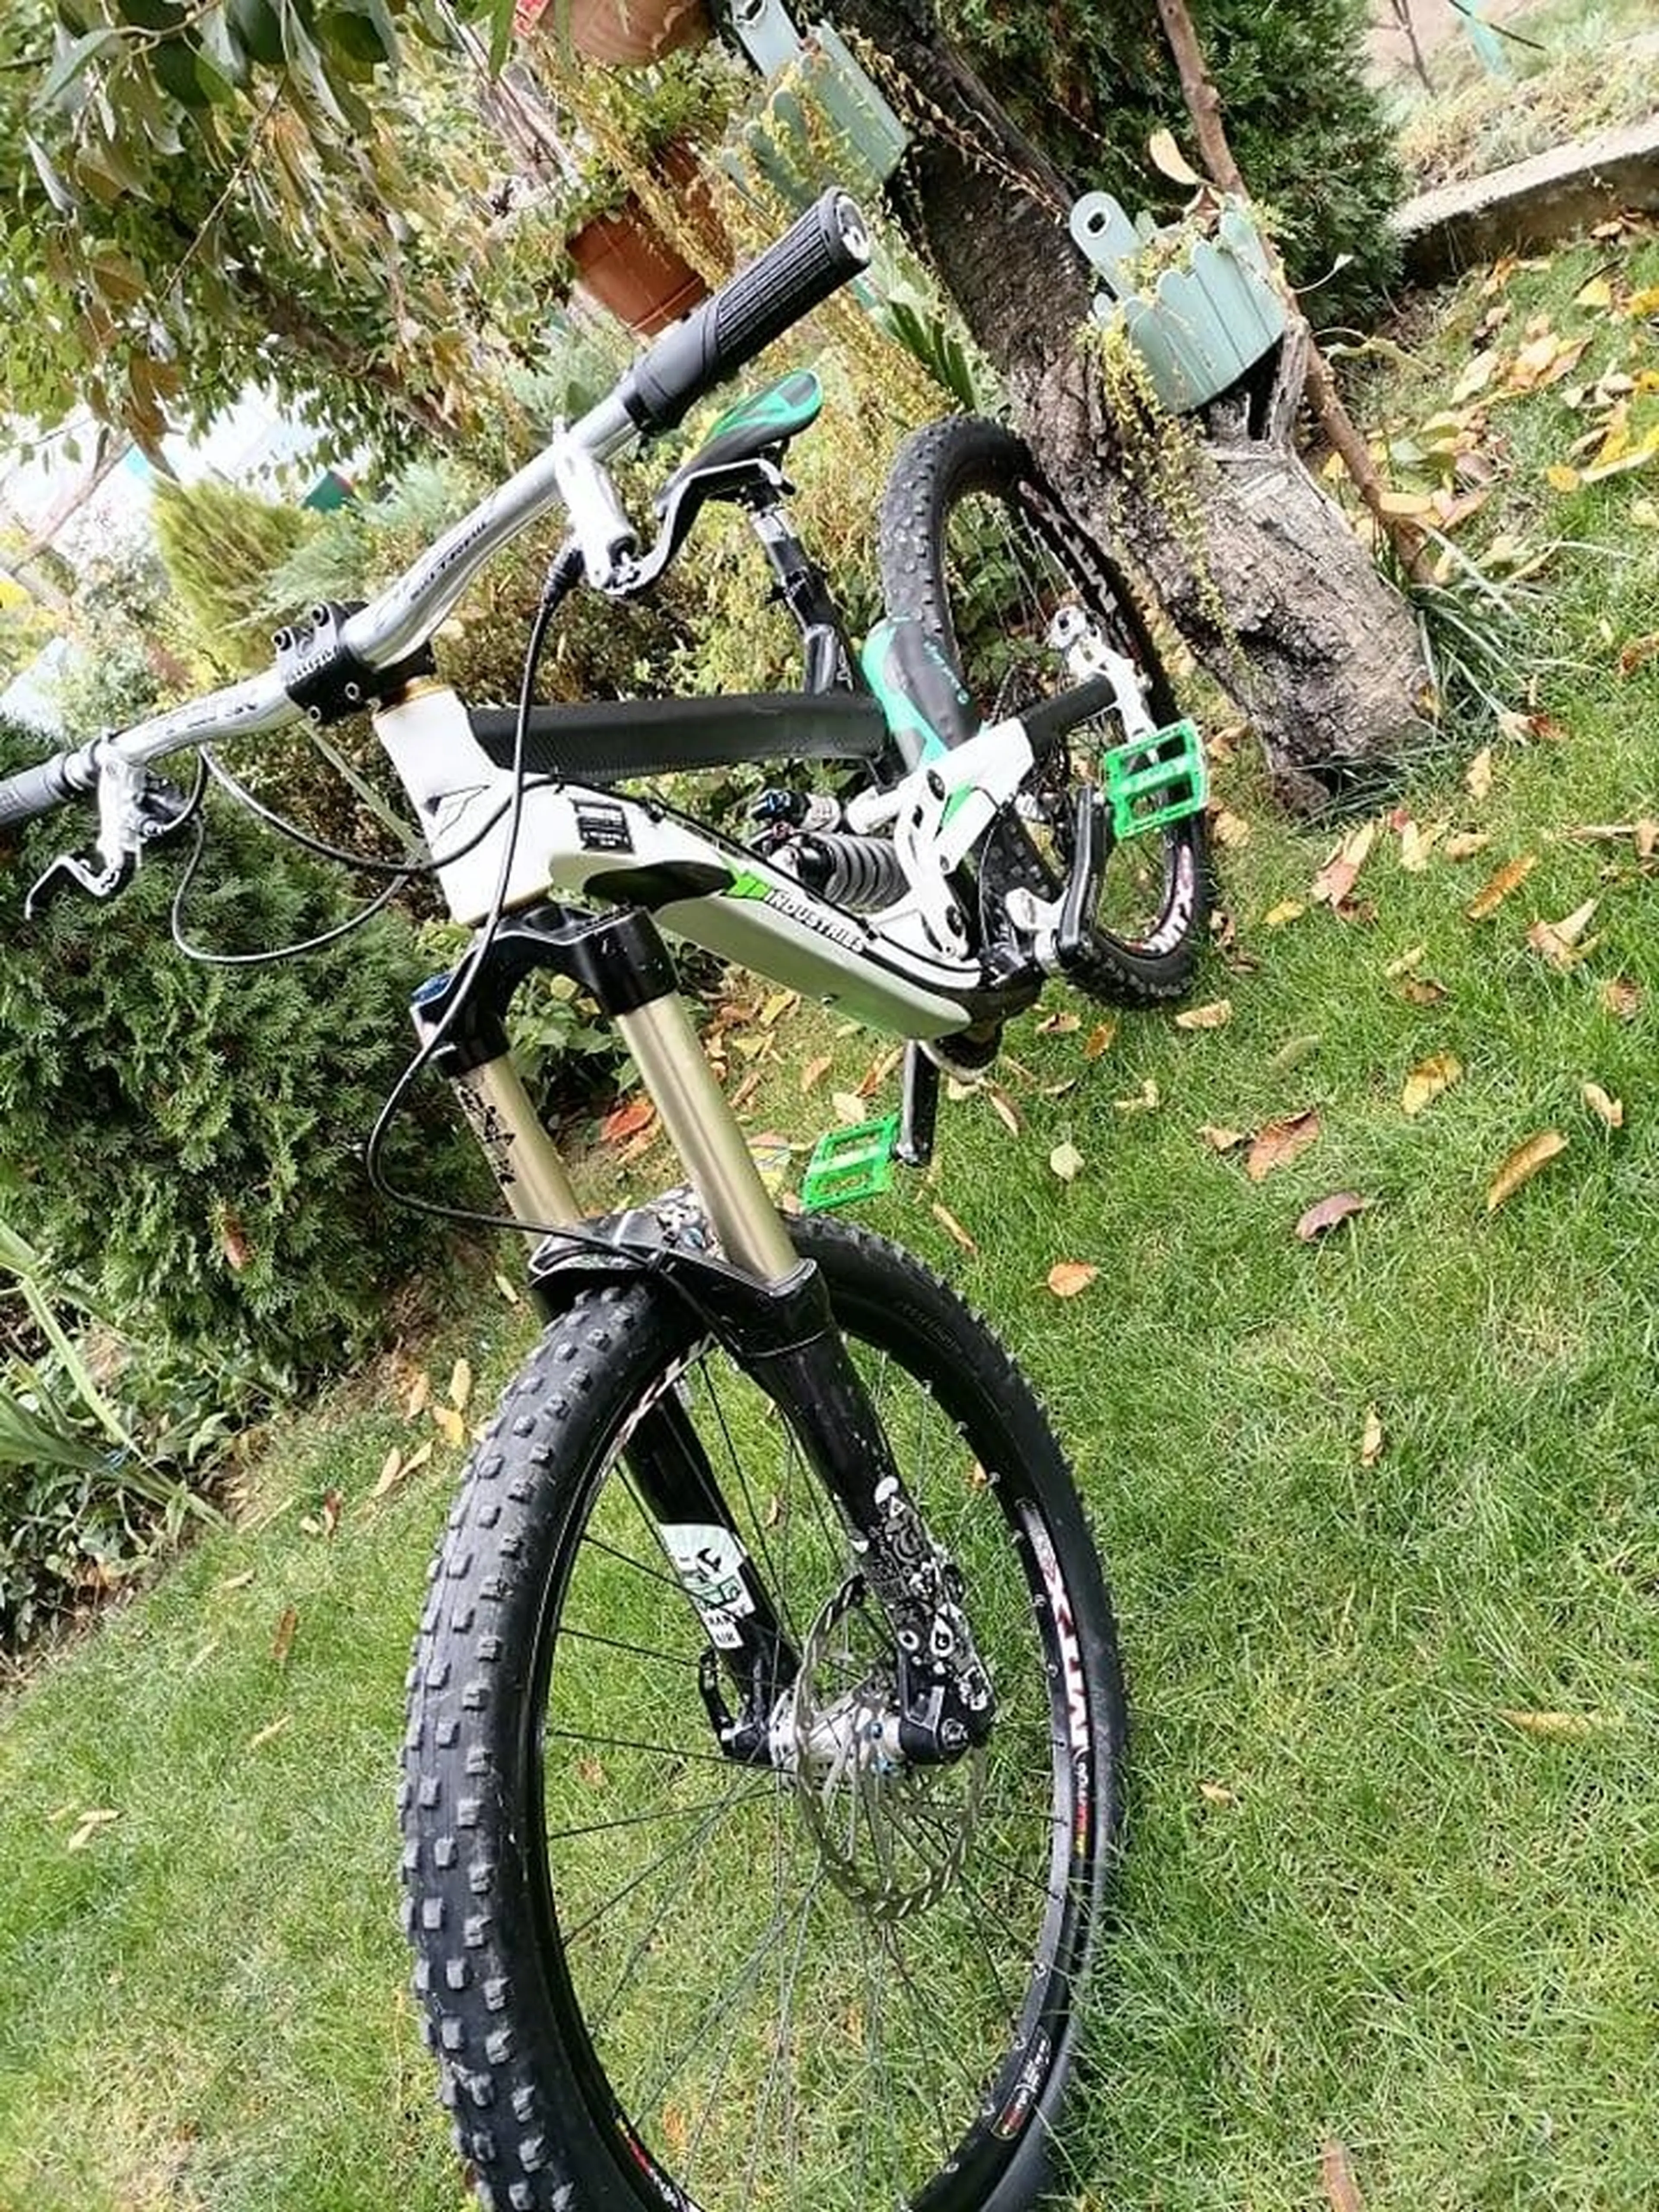 5. YT Industries Tues 2010